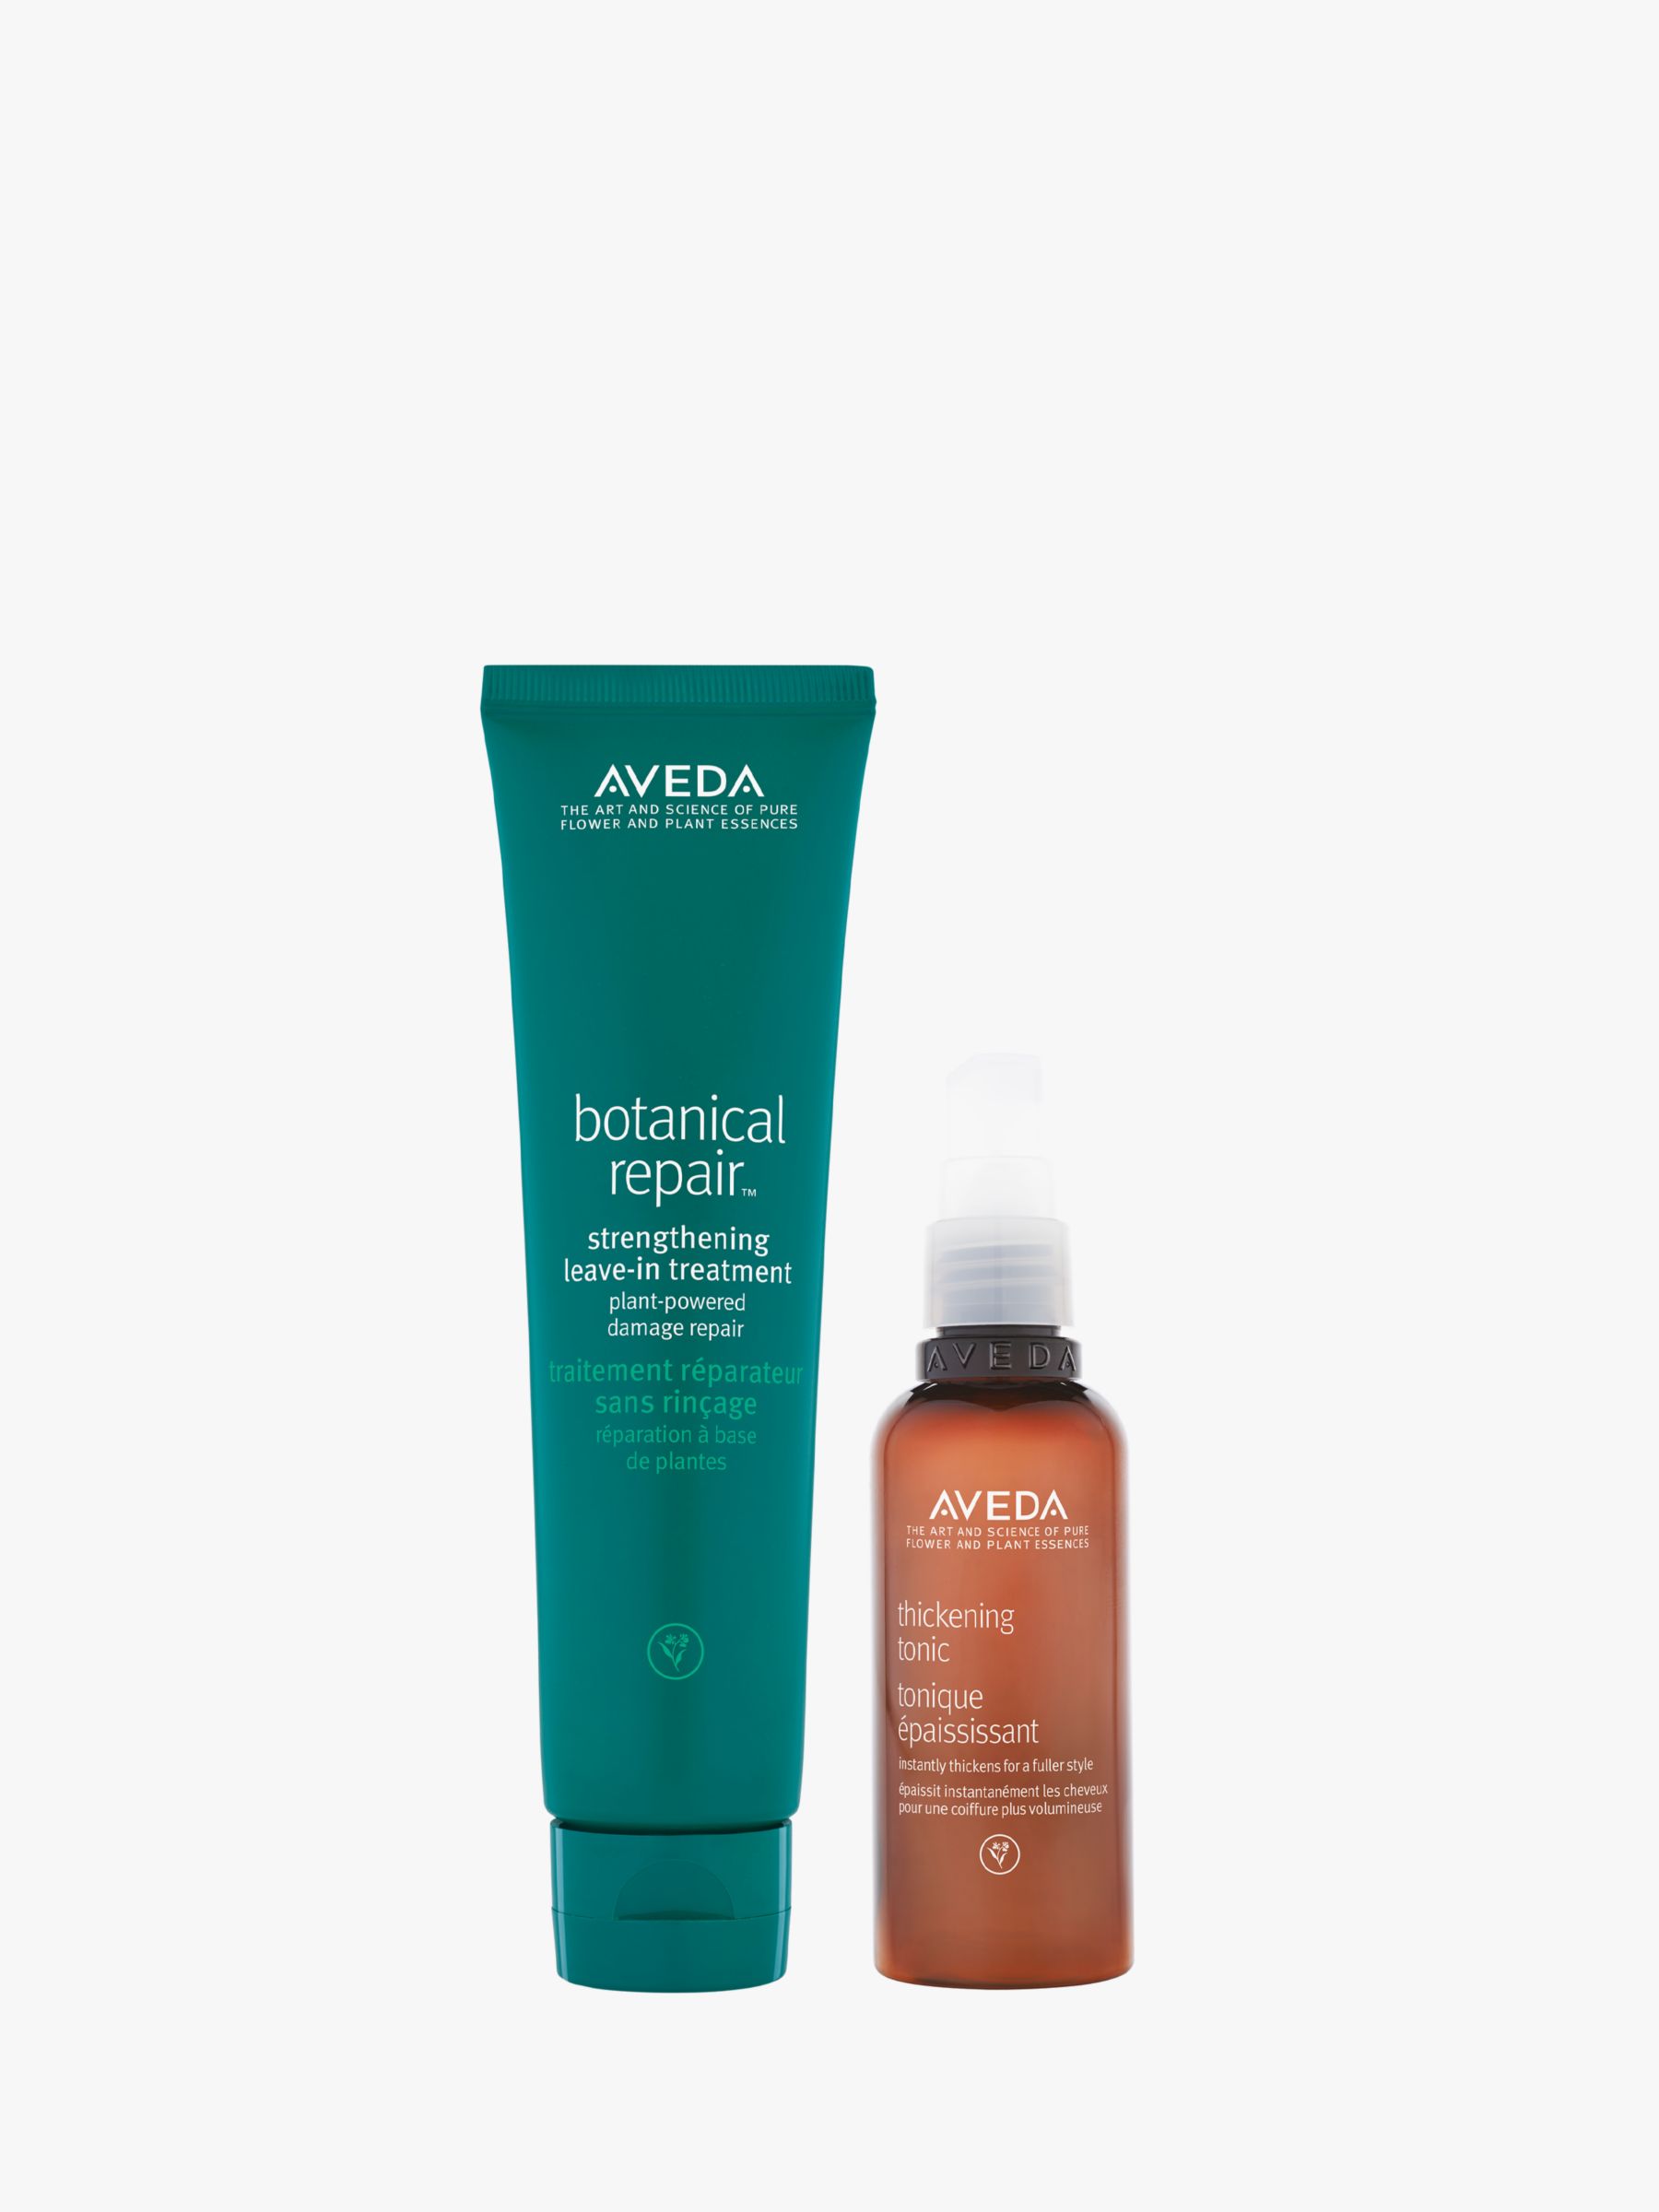 Aveda Botanical Repair Leave-In Treatment  and Thickening Tonic Bundle